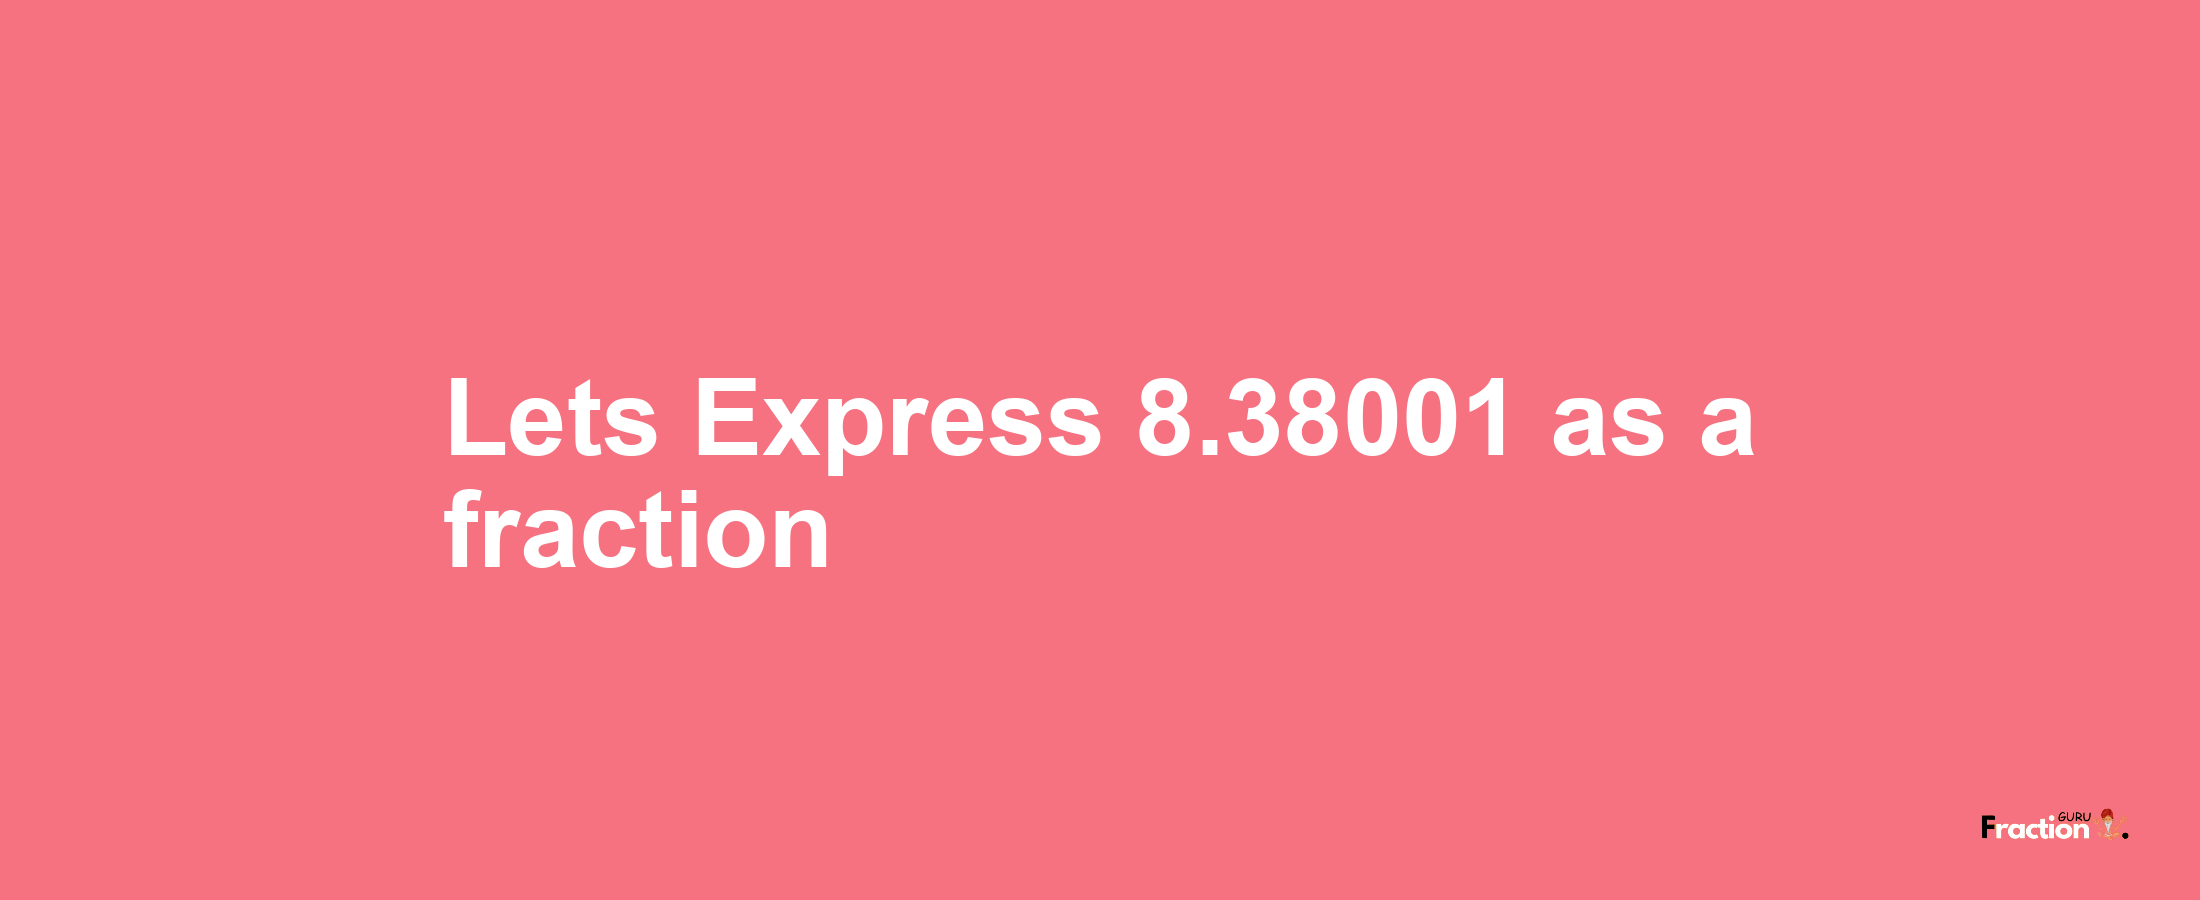 Lets Express 8.38001 as afraction